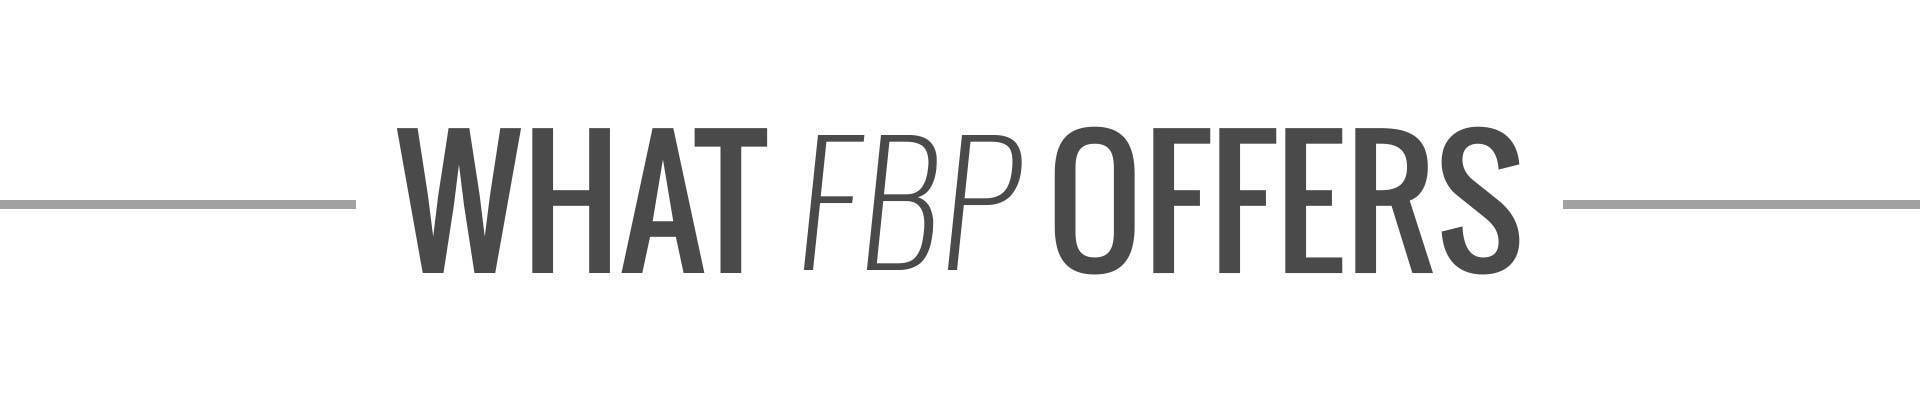 What-FBP-offers